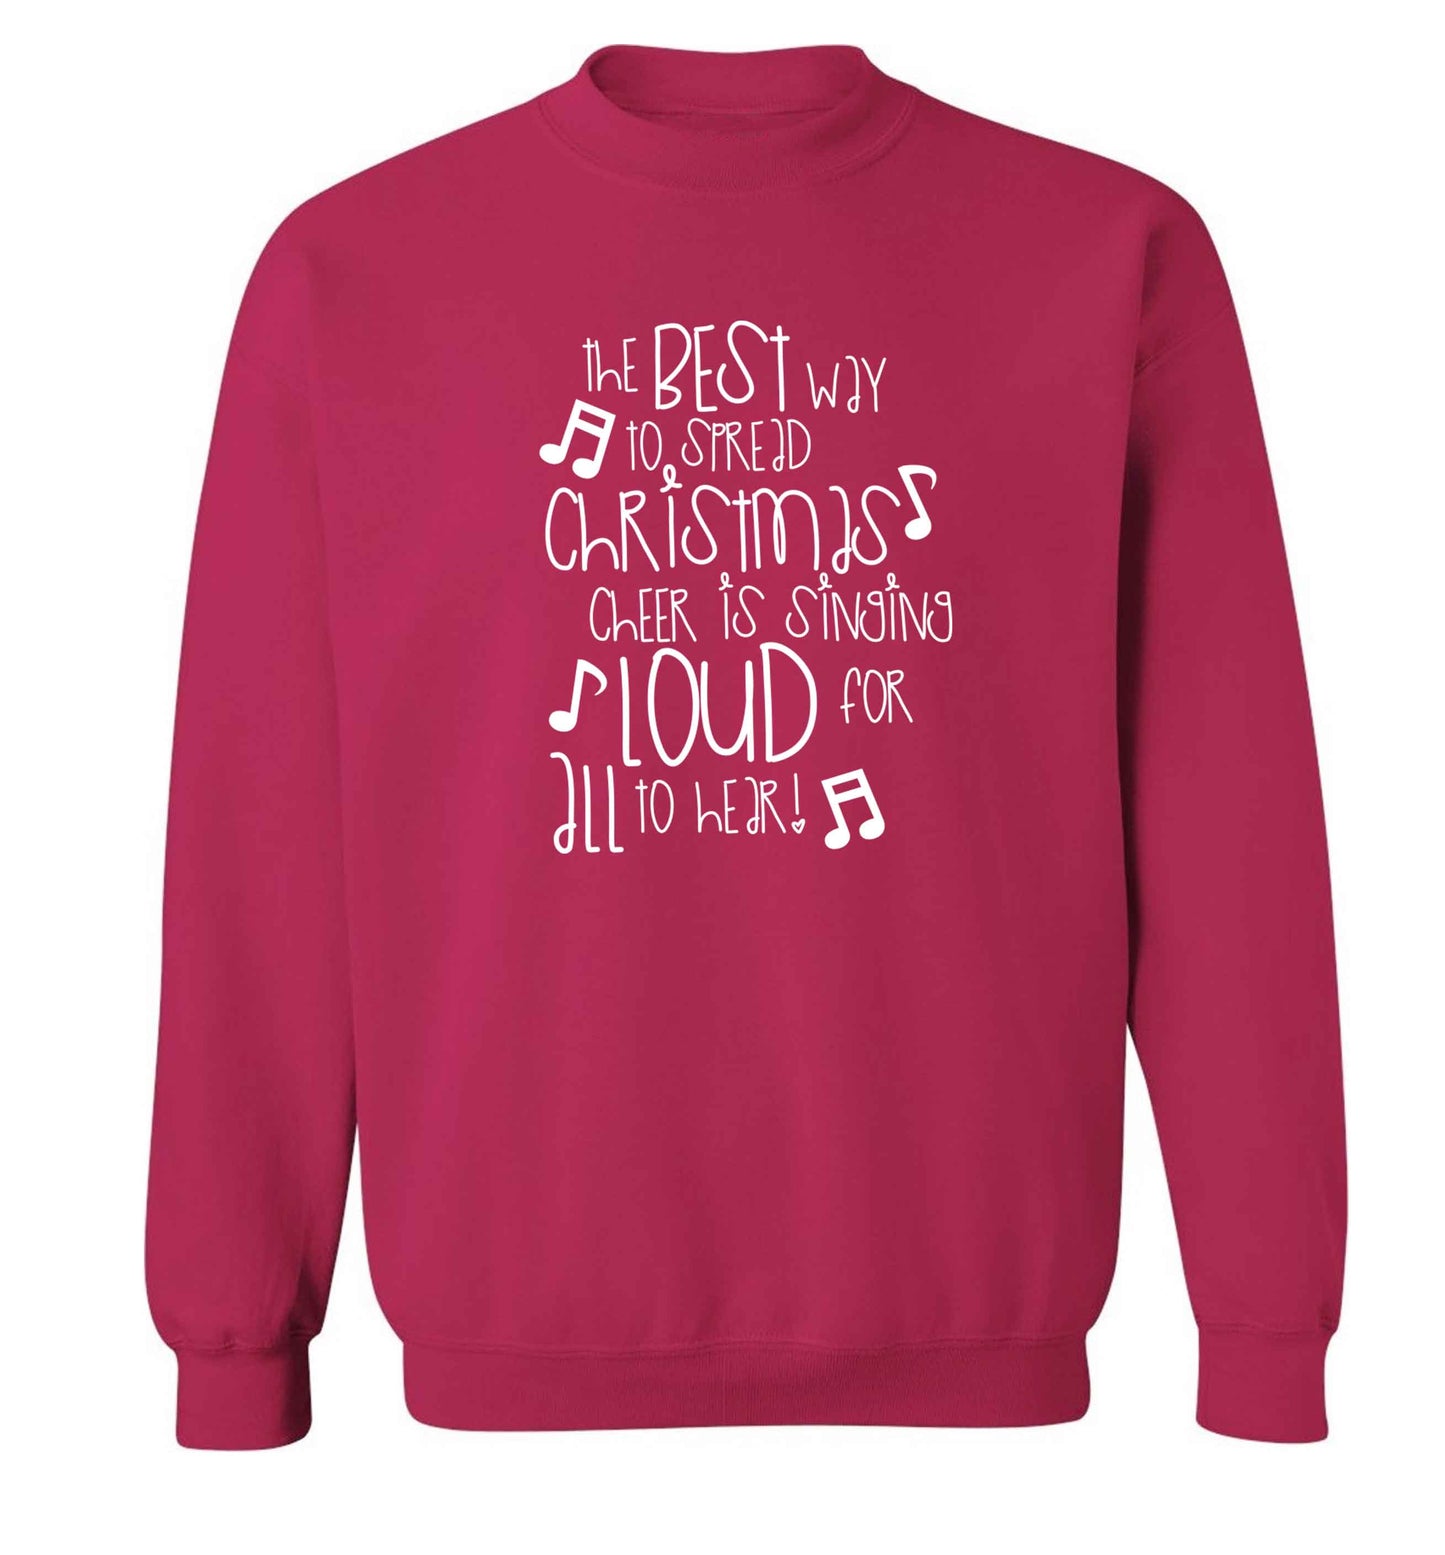 The best way to spread Christmas cheer is singing loud for all to hear adult's unisex pink sweater 2XL